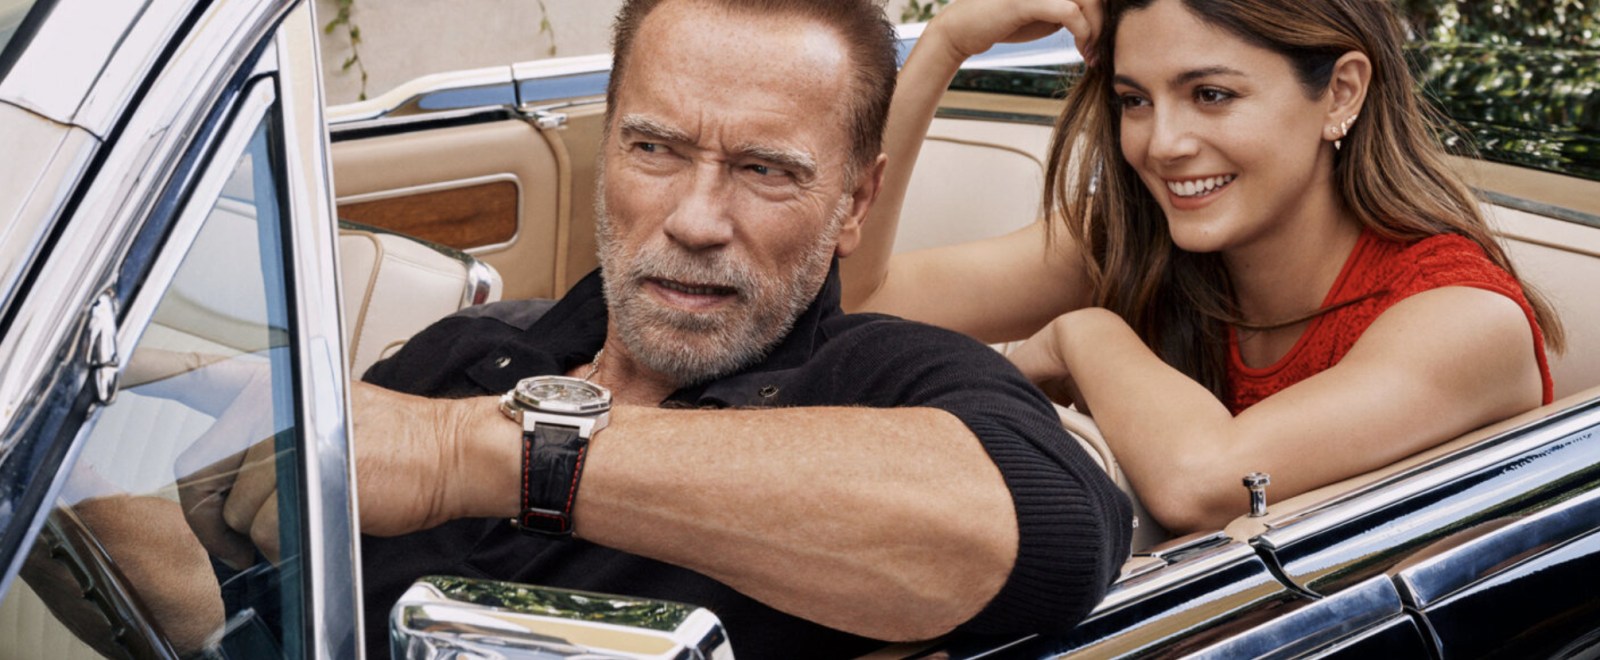 Arnold Schwarzenegger’s ‘FUBAR’ Season 2: Everything To Know So Far Including The Release Date, Cast, And More